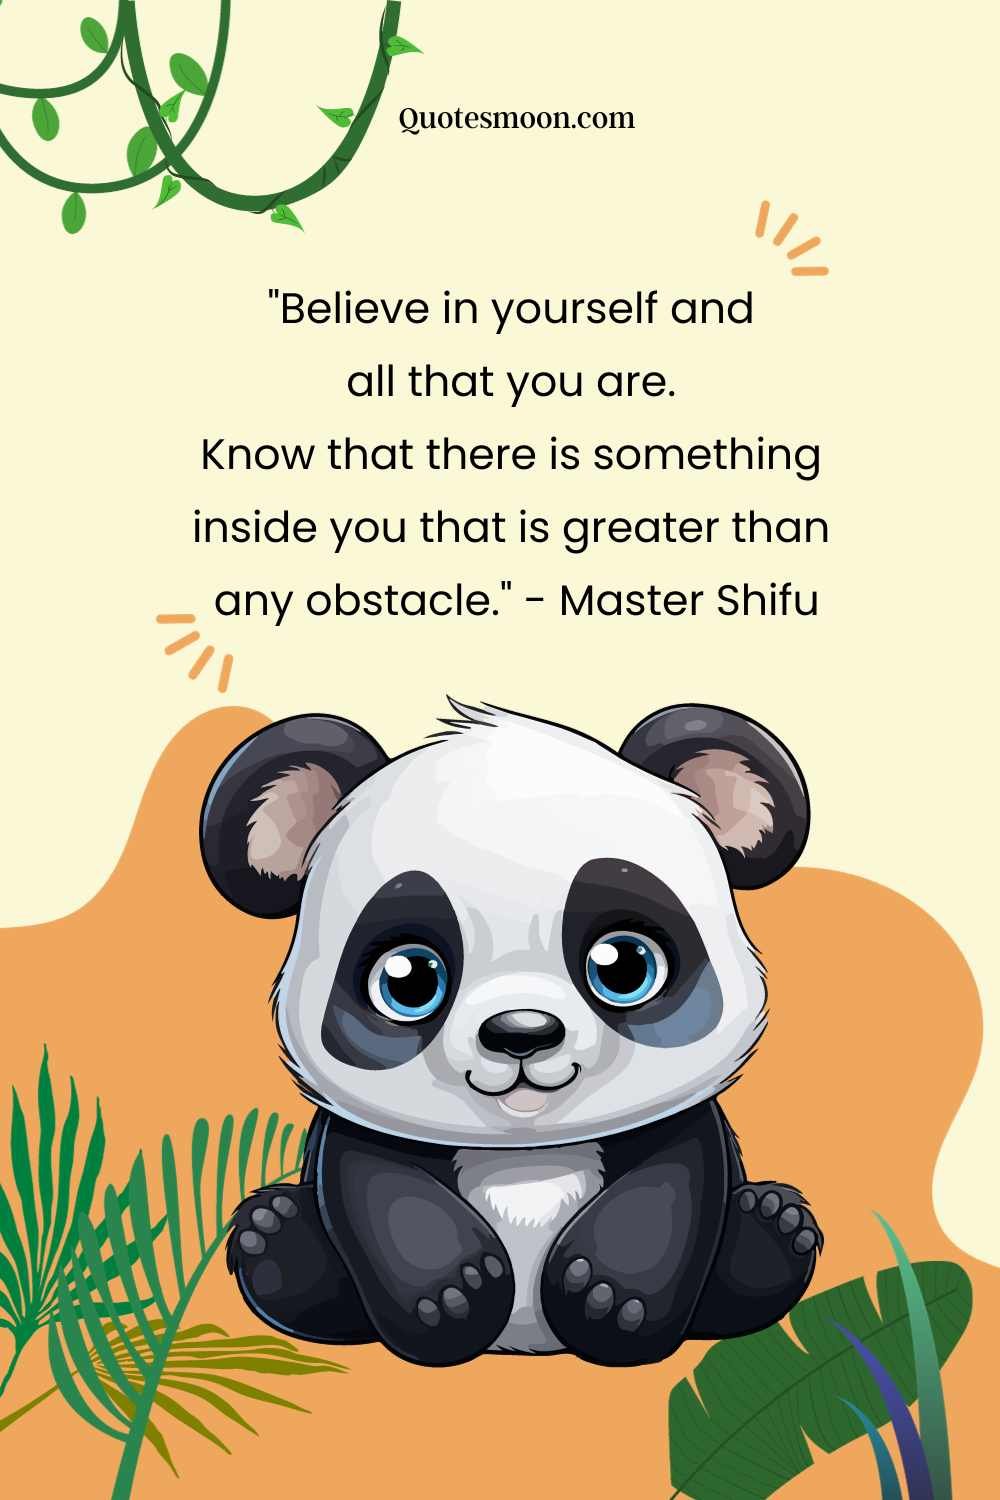 Famous Master Oogway Motivational Quotes Ever with images